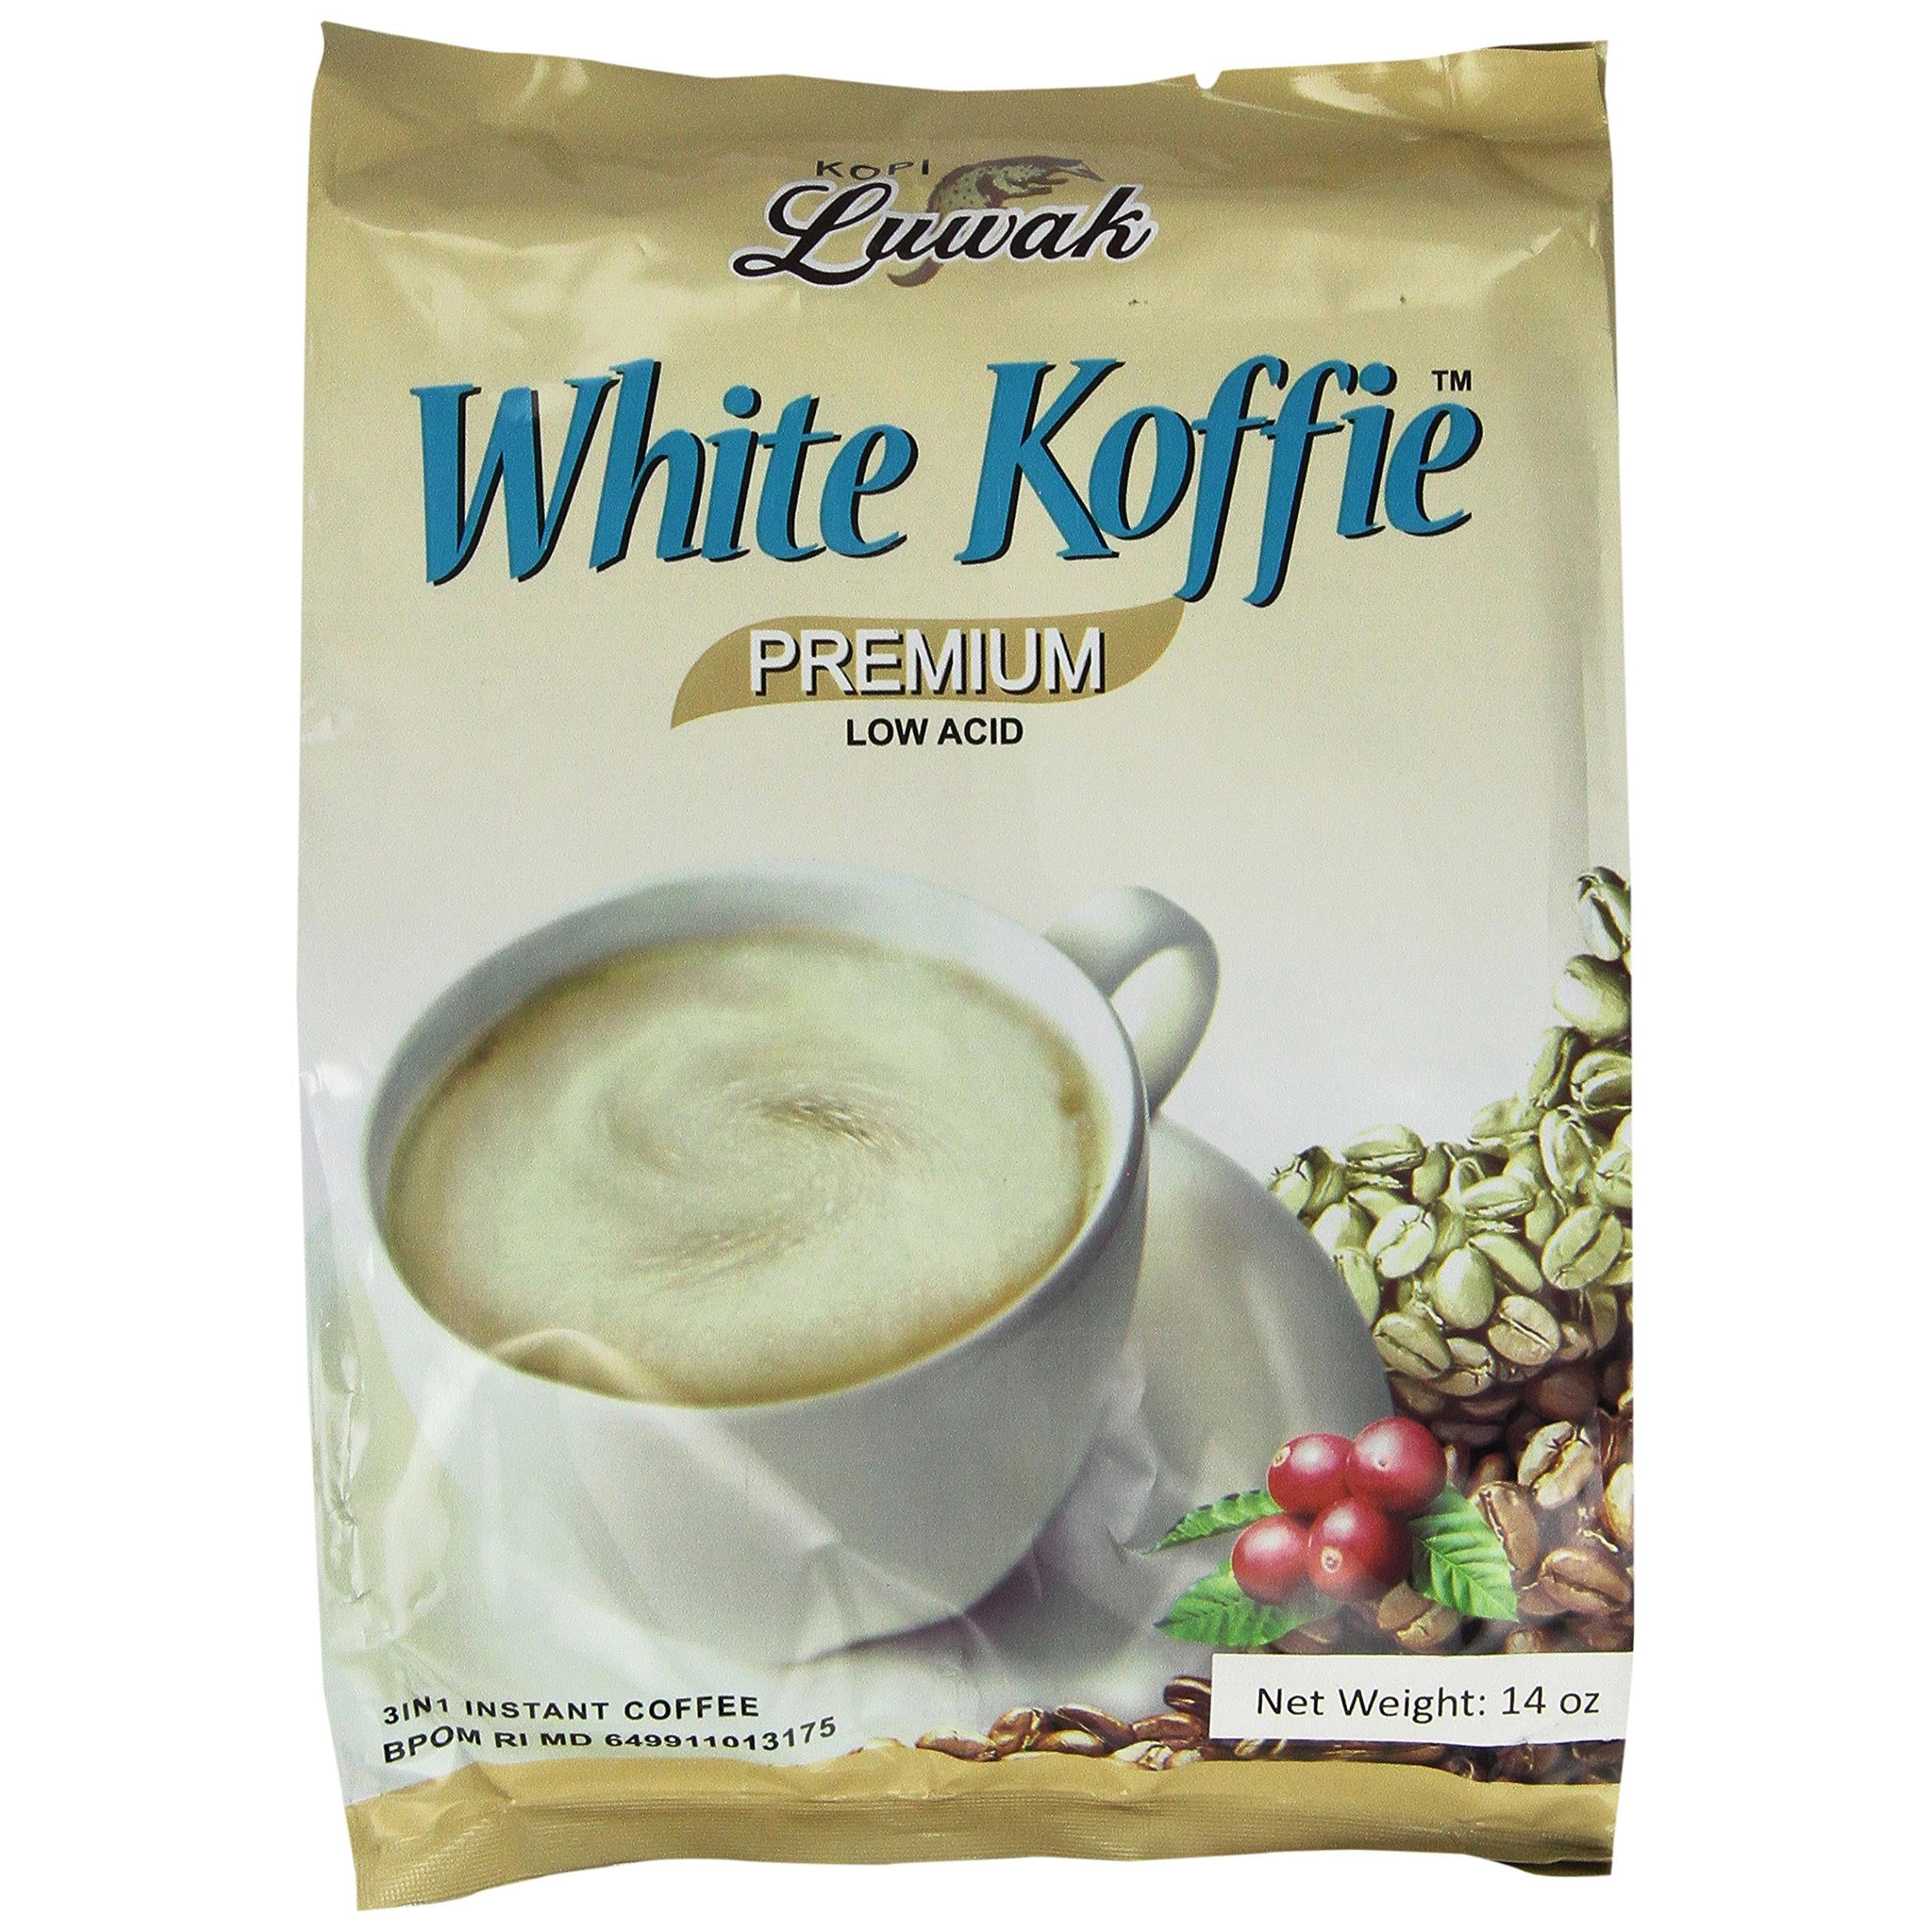 LUWAK White Koffie LOW ACID (3in1) Instant Coffee 13.5oz, Pack of 20 sachets